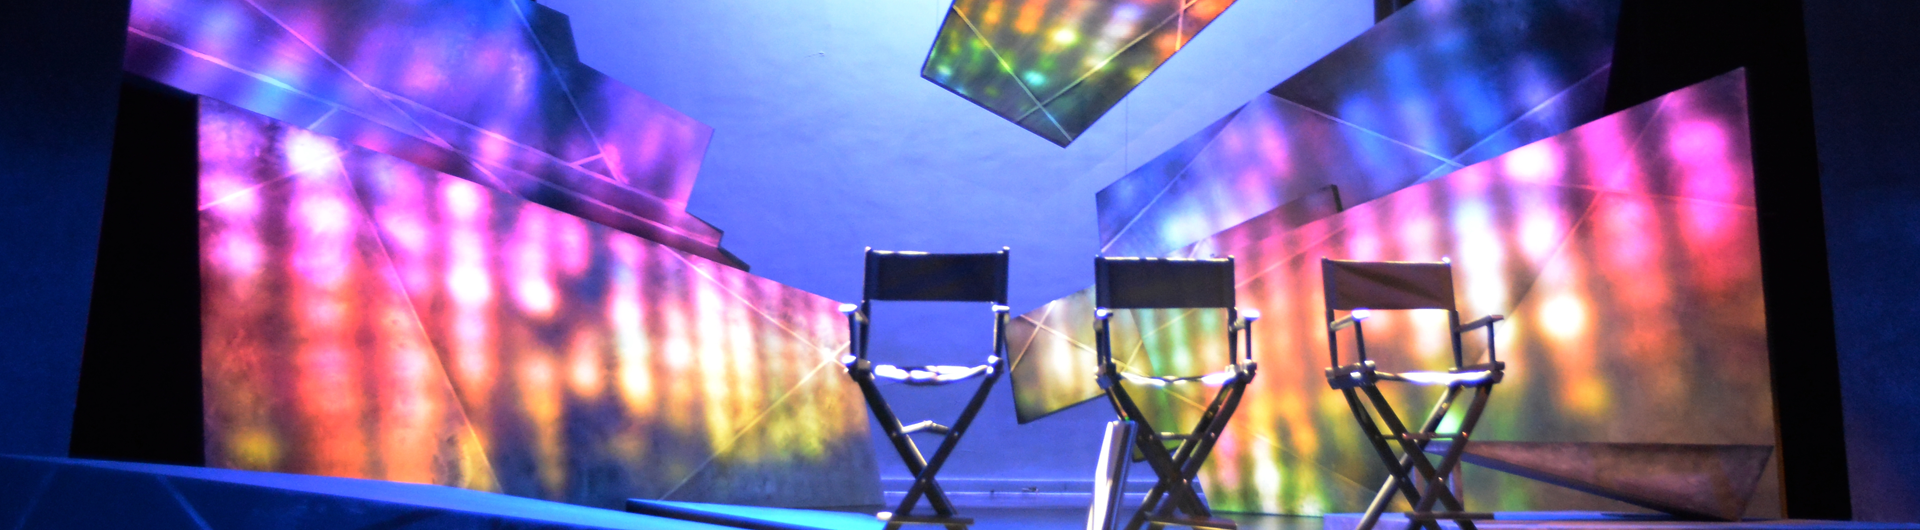 Three empty Director's chairs in front of colorful backdrop